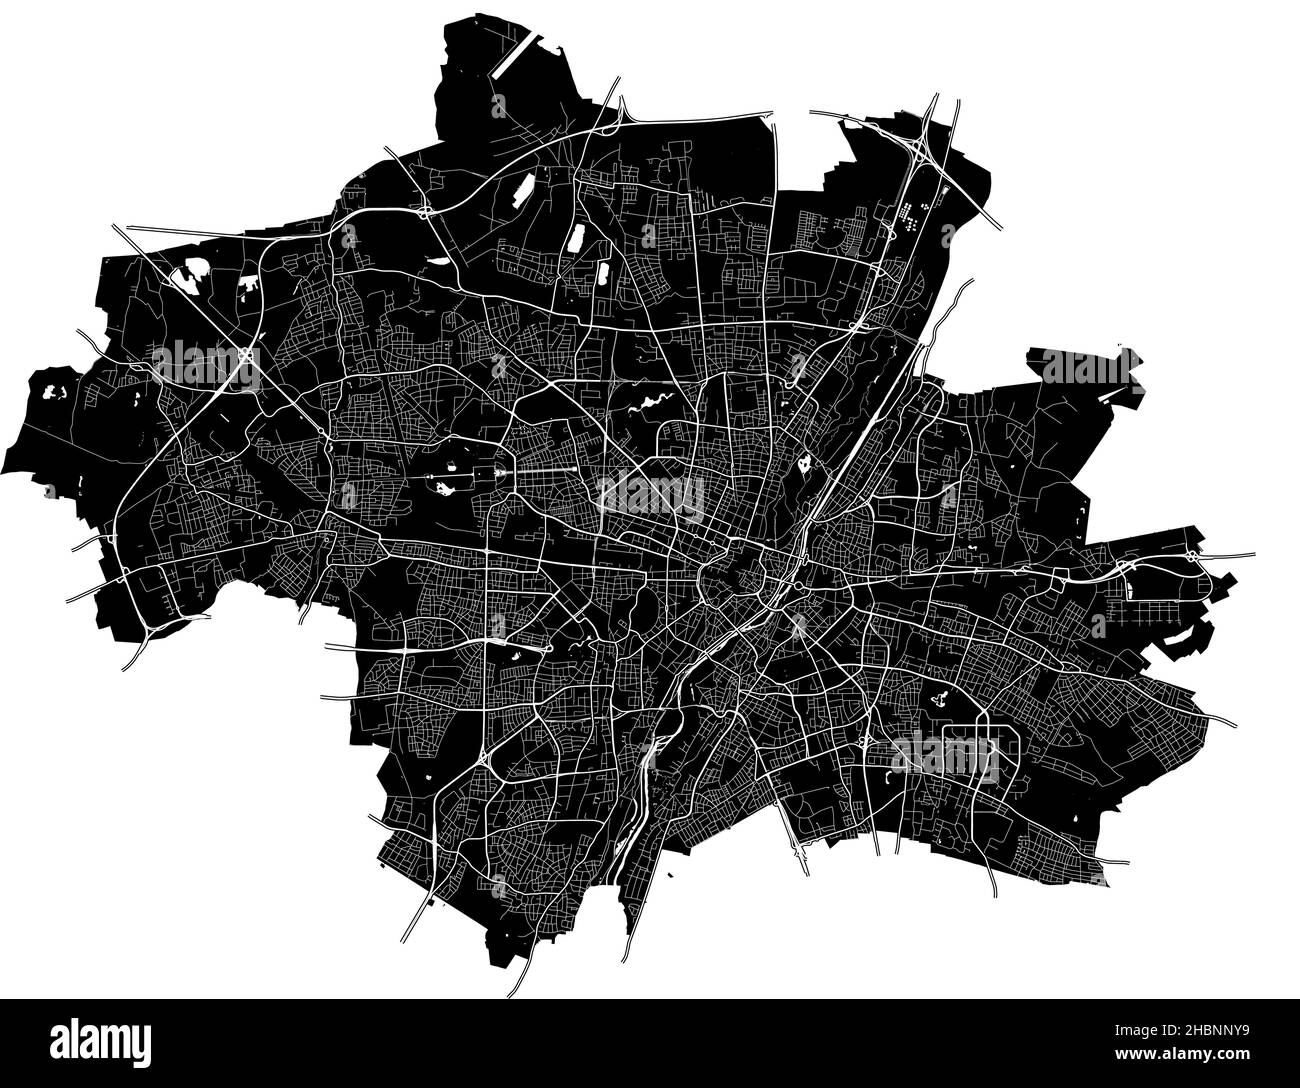 München, Bavaria, Germany, Germany, high resolution vector map with city boundaries, and editable paths. The city map was drawn with white areas and l Stock Vector